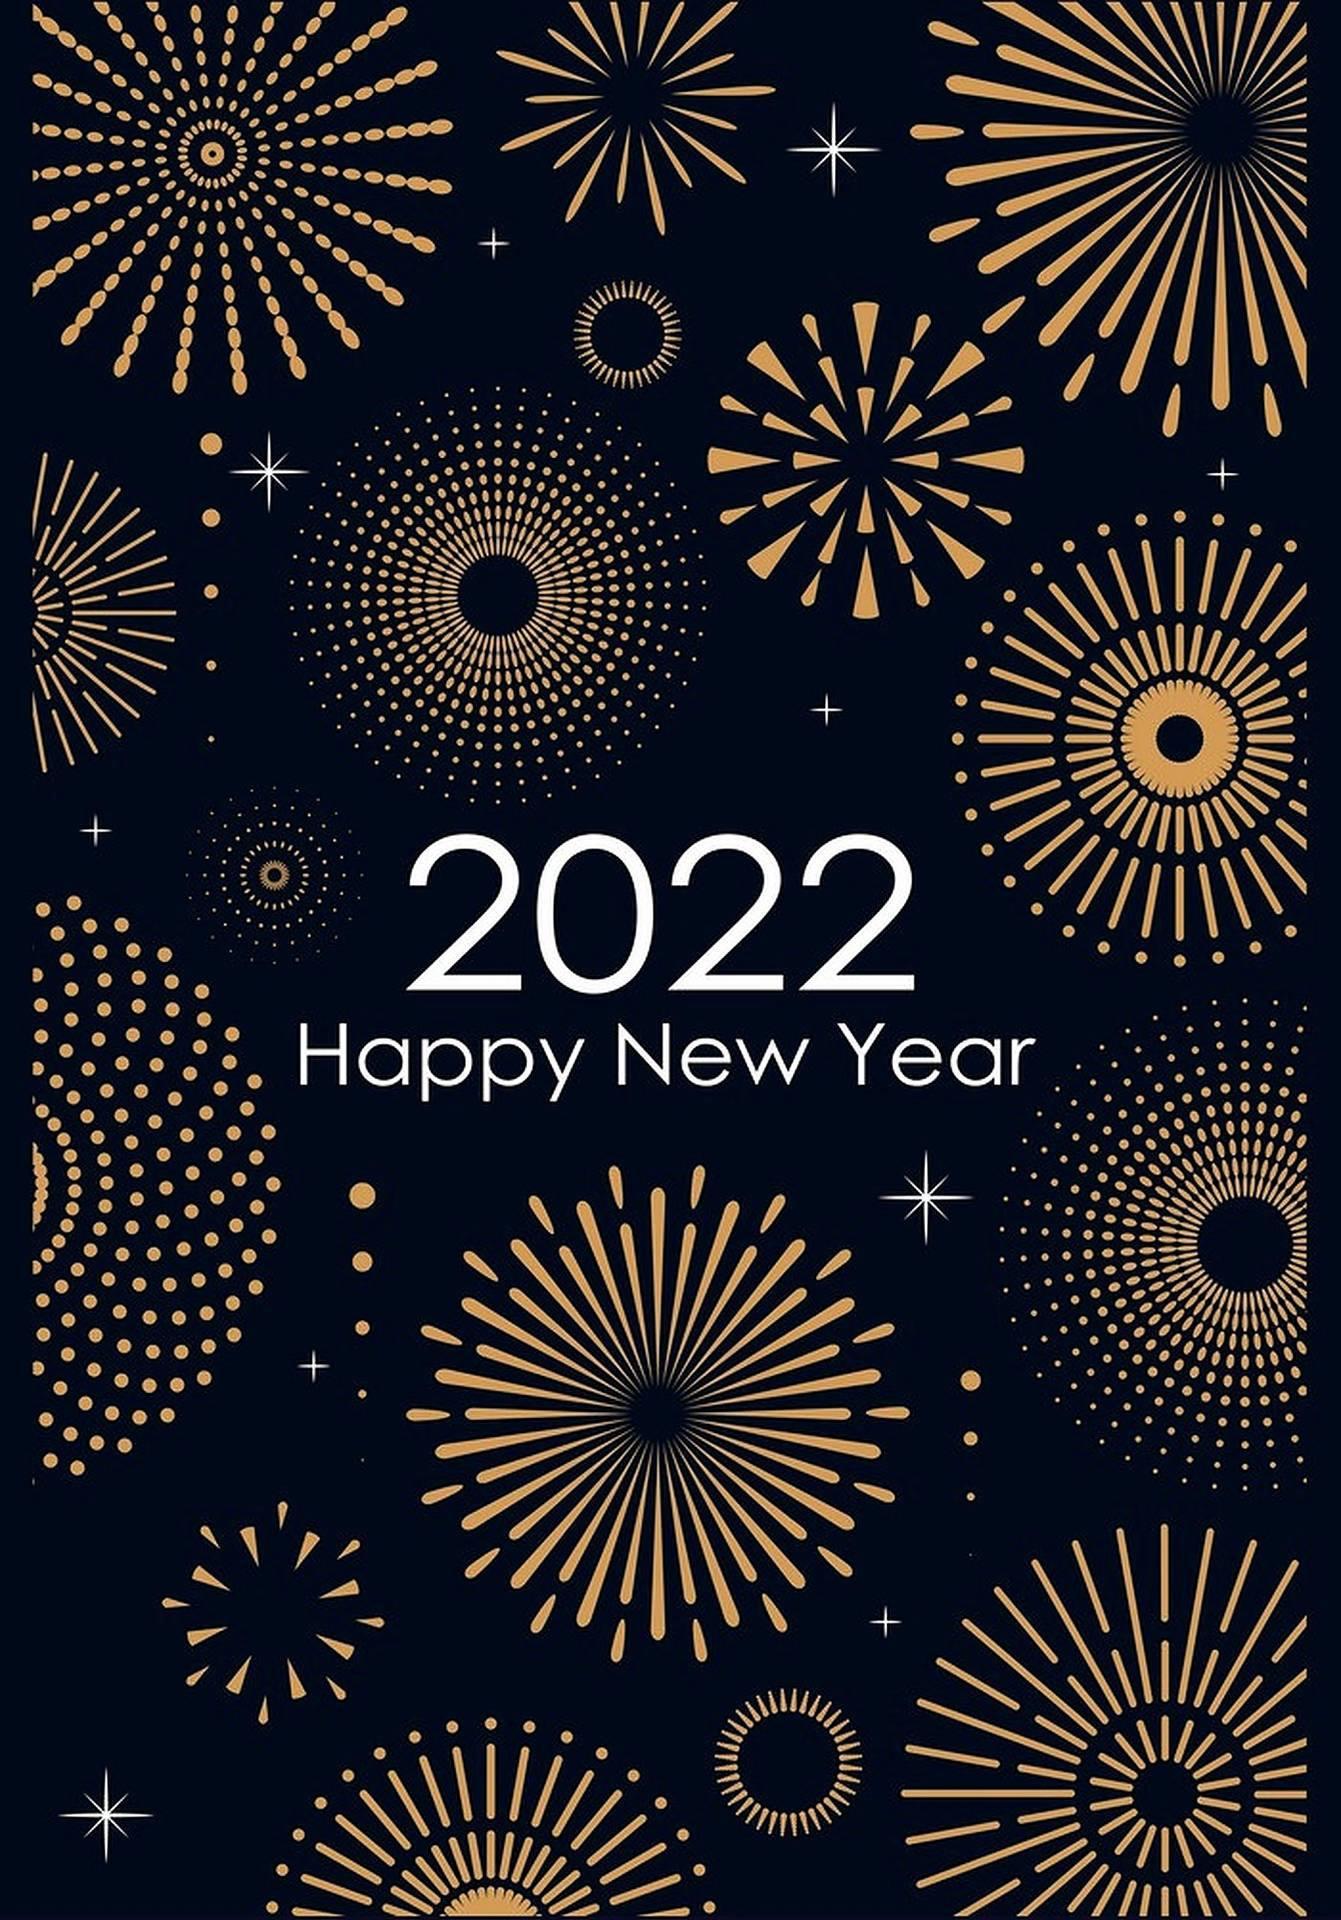 Welcoming New Year 2022 With A Bang!